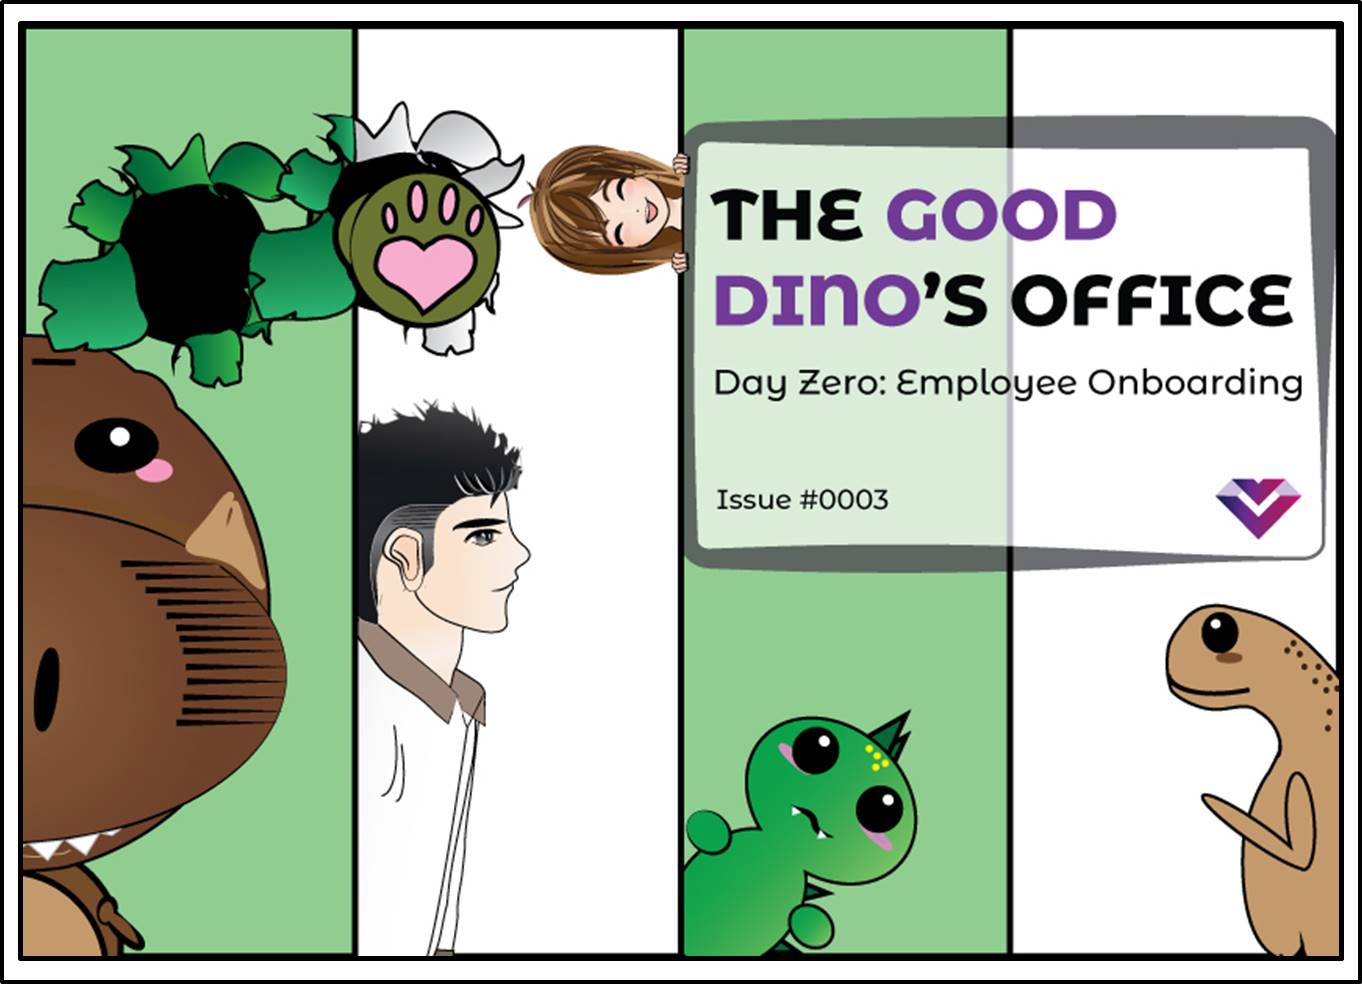 The Good Dino’s Office: Employee Onboarding Day Zero